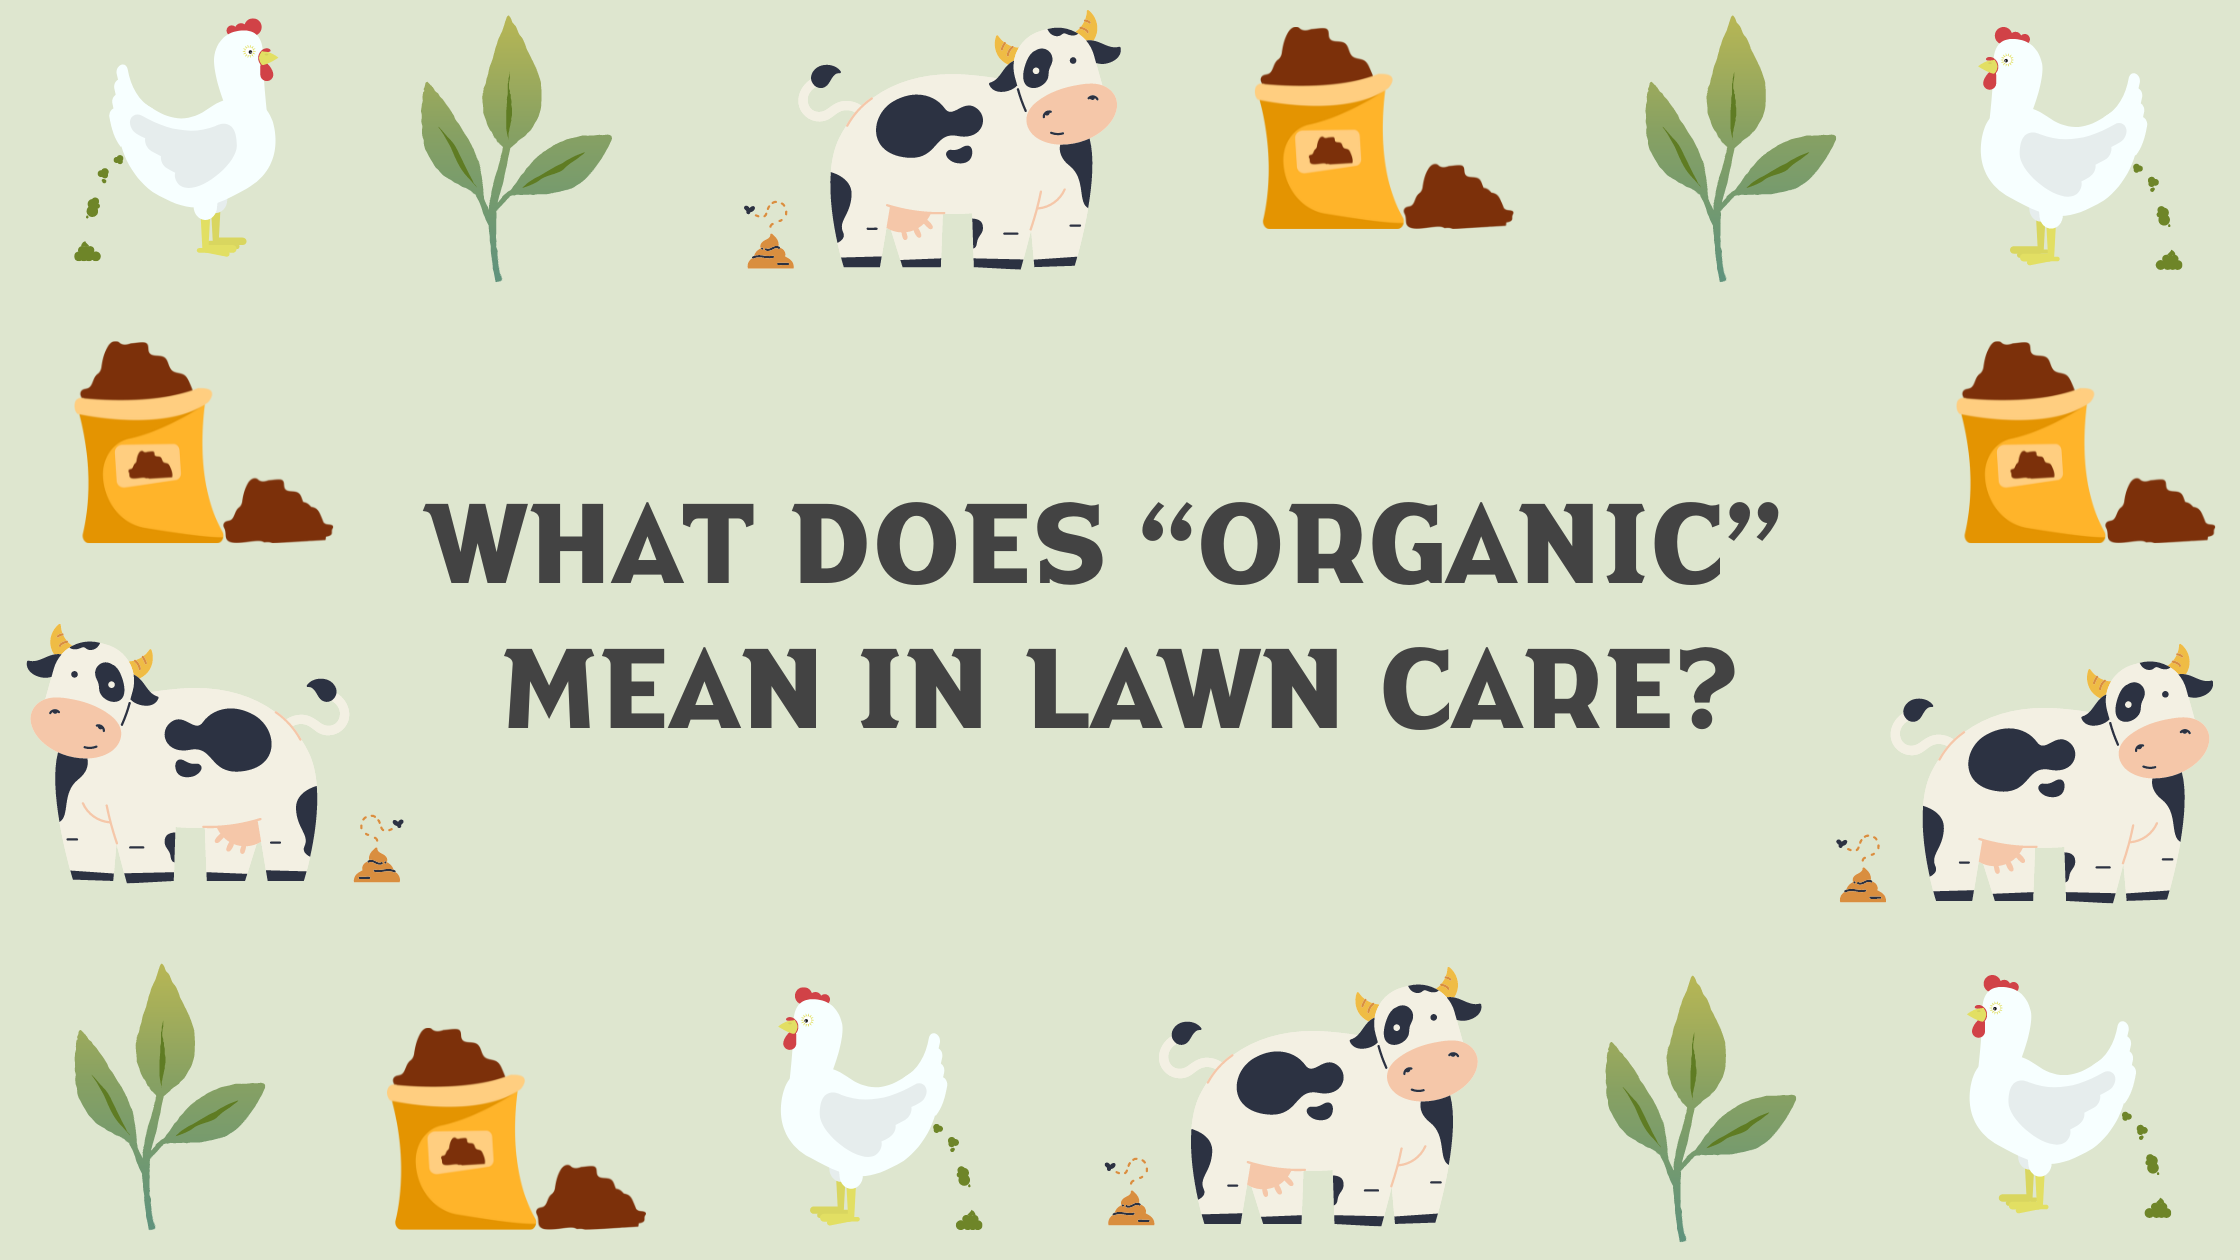 What Does “Organic” Mean for Lawn Care